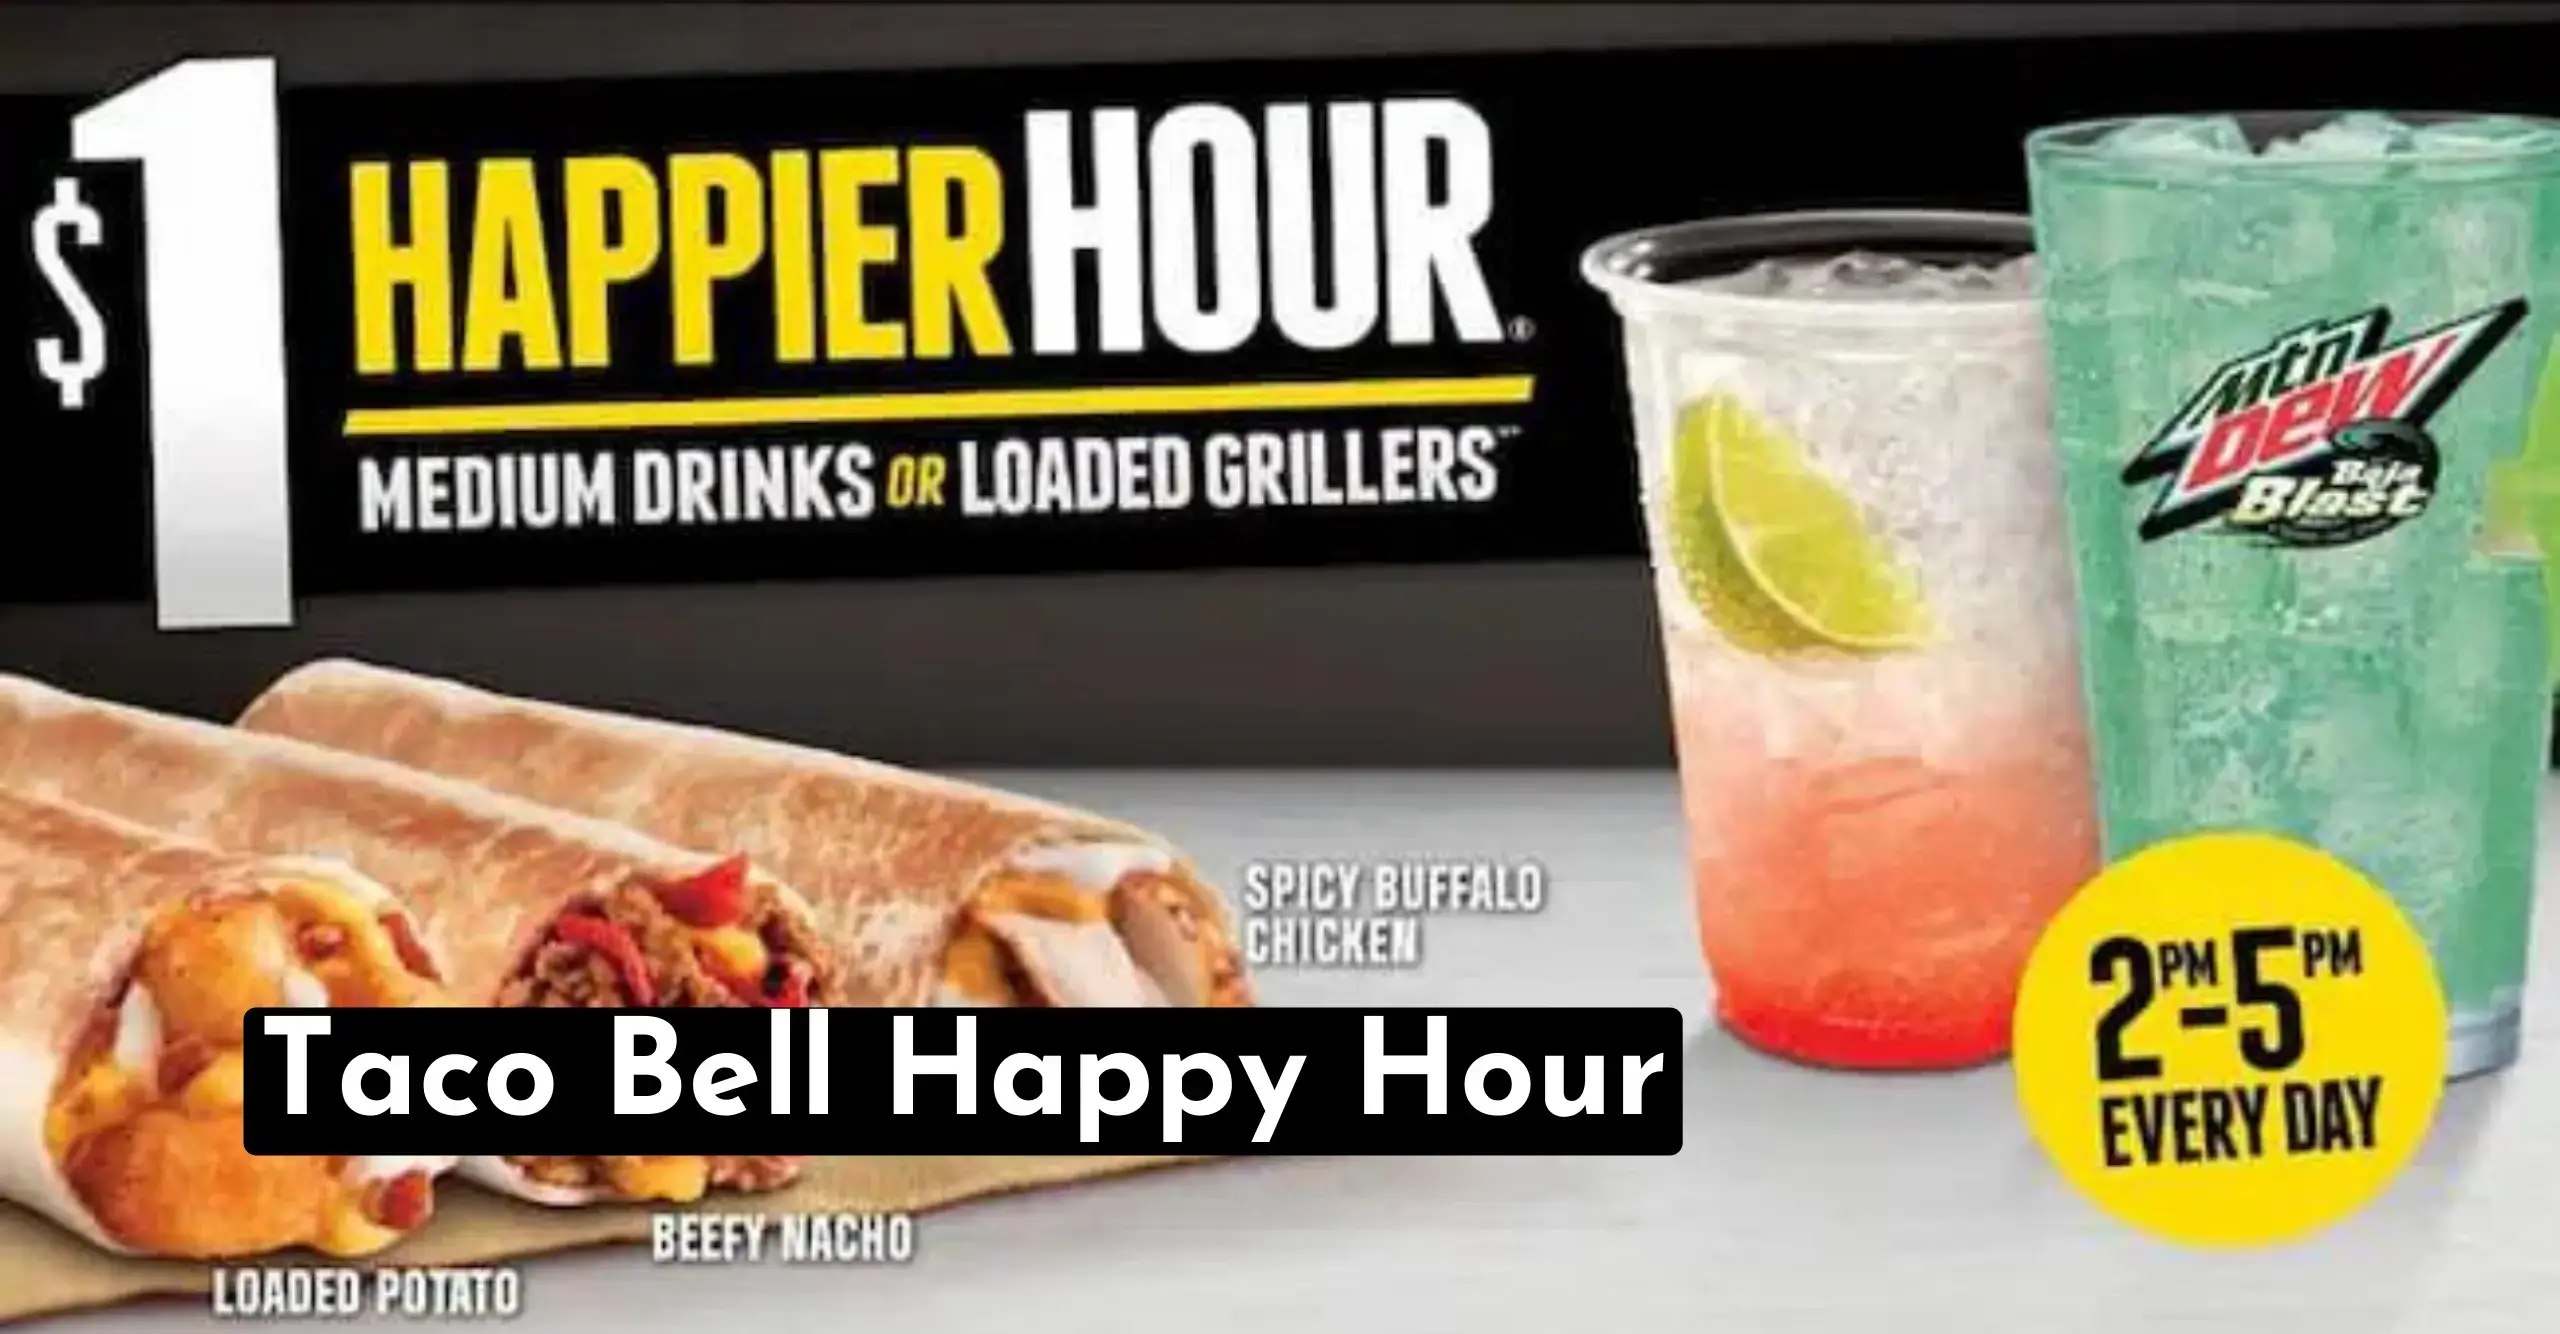 A Quick Guide To Plan Your Trip For Taco Bell Happy Hour | Also Quickly Find The Happy Hour Menu Options, Prices & Timings. | store-hour.com